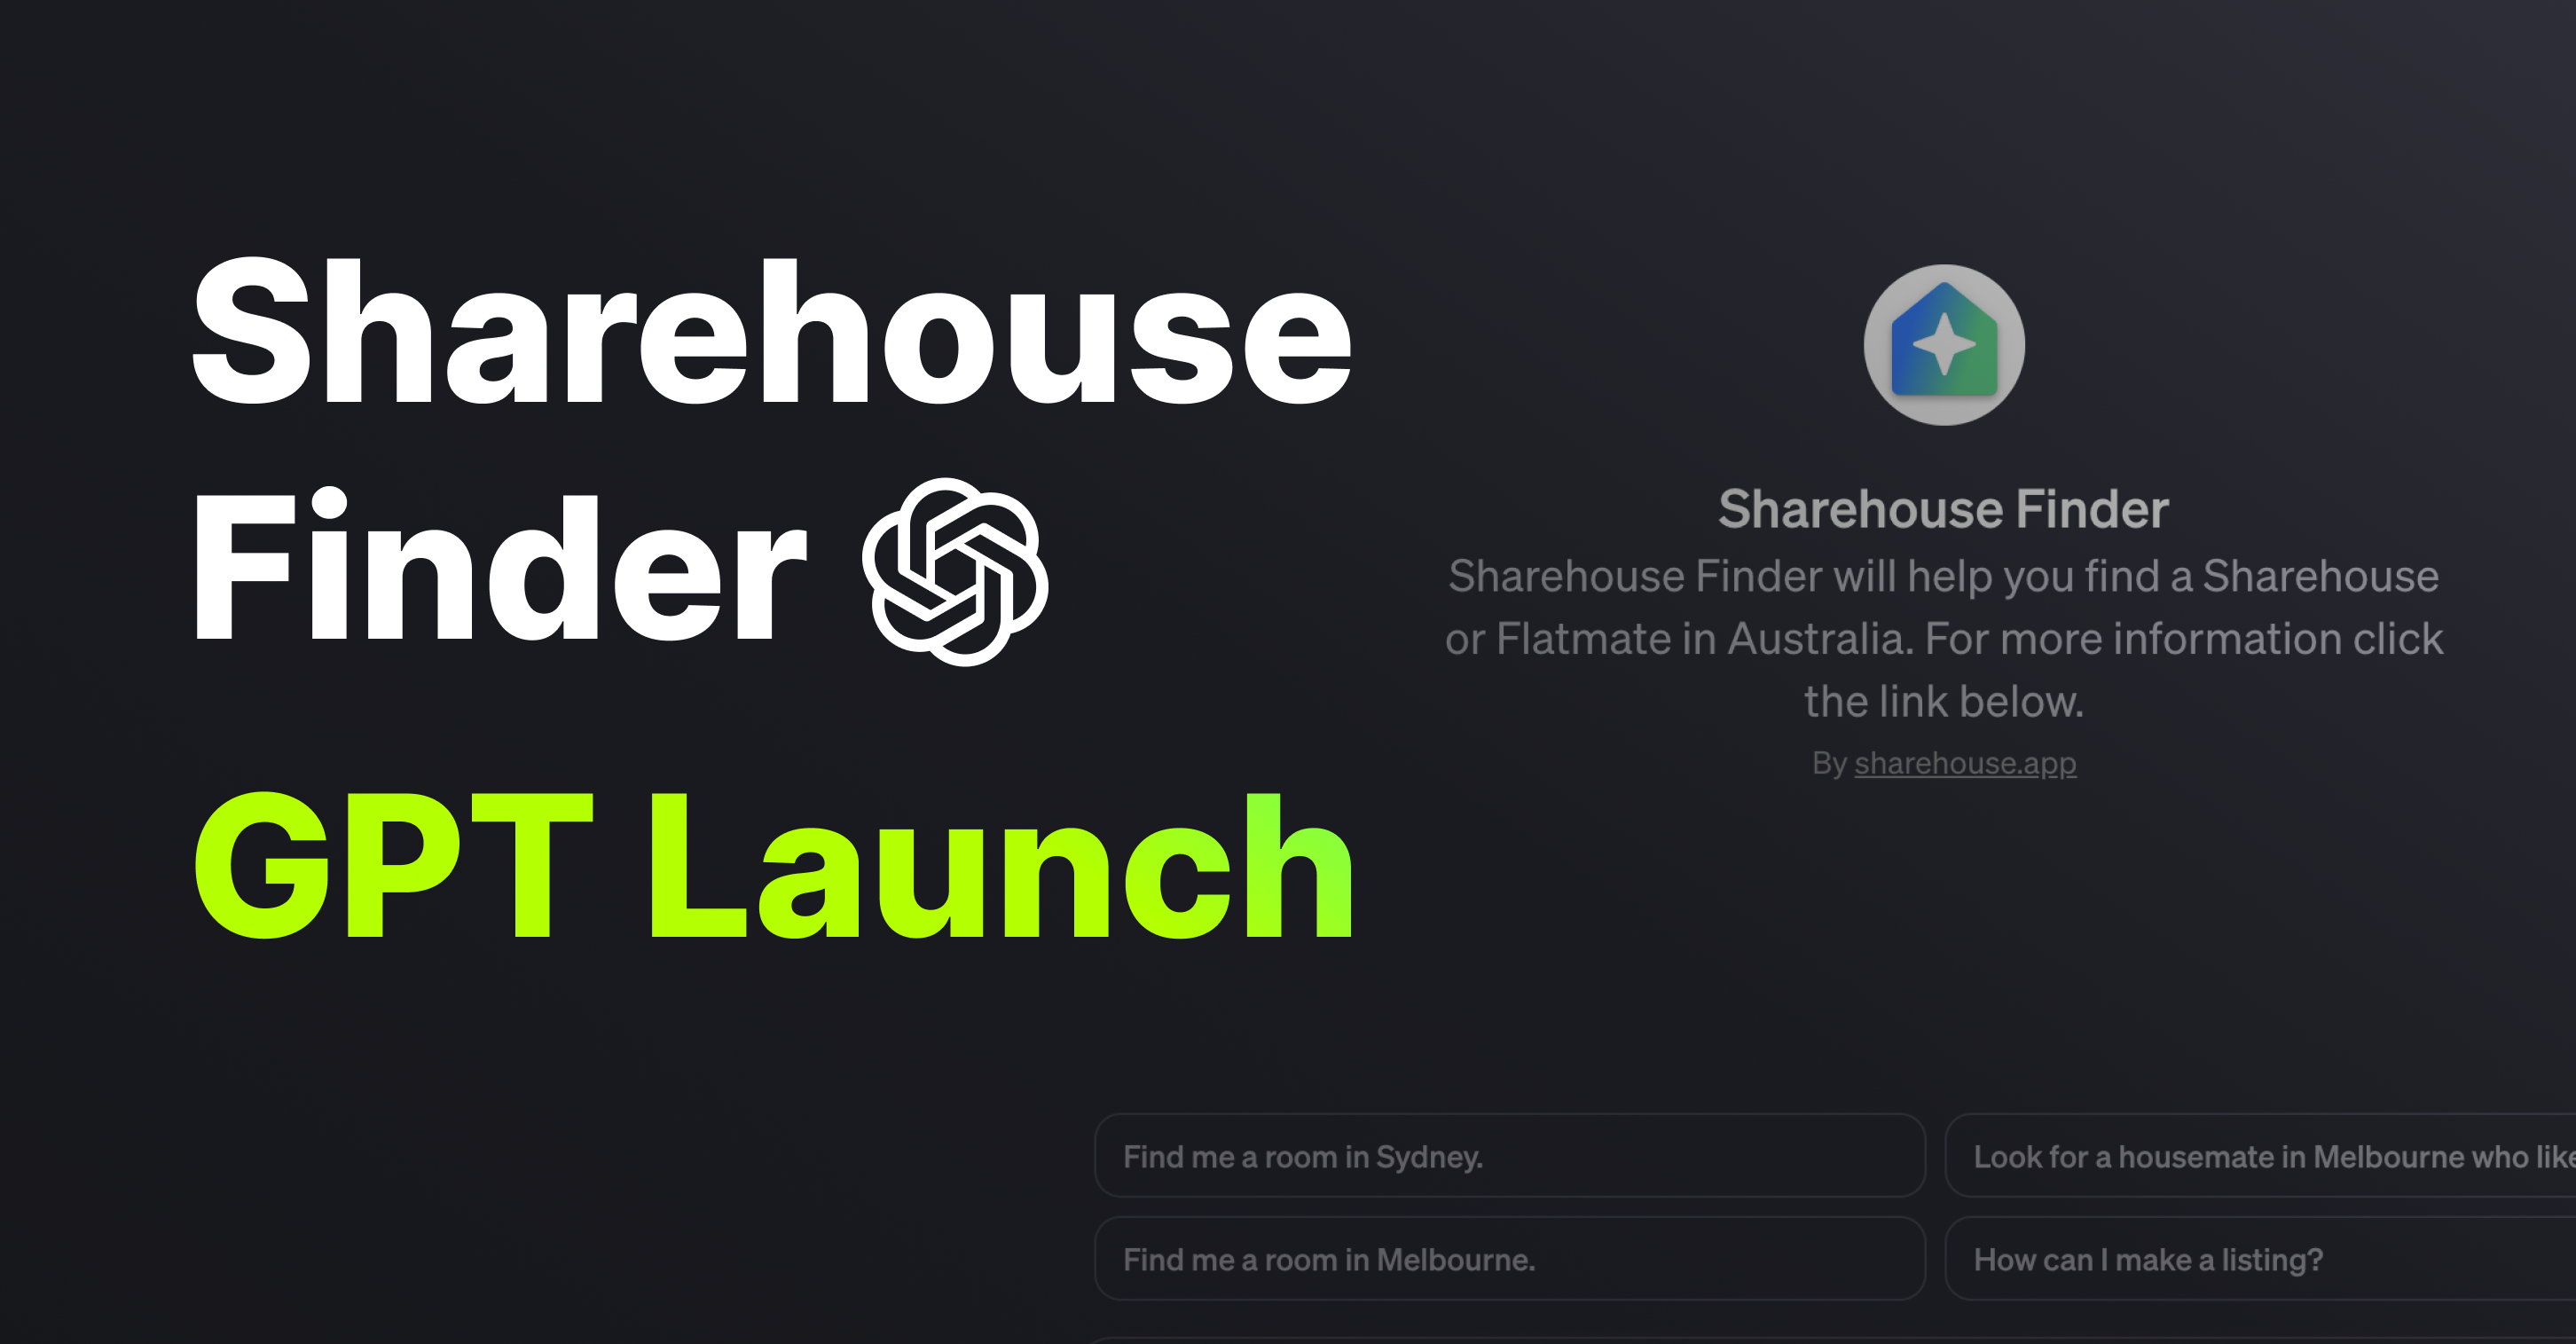 Sharehouse Finder: Our New AI-Powered Flatmate Assistant 